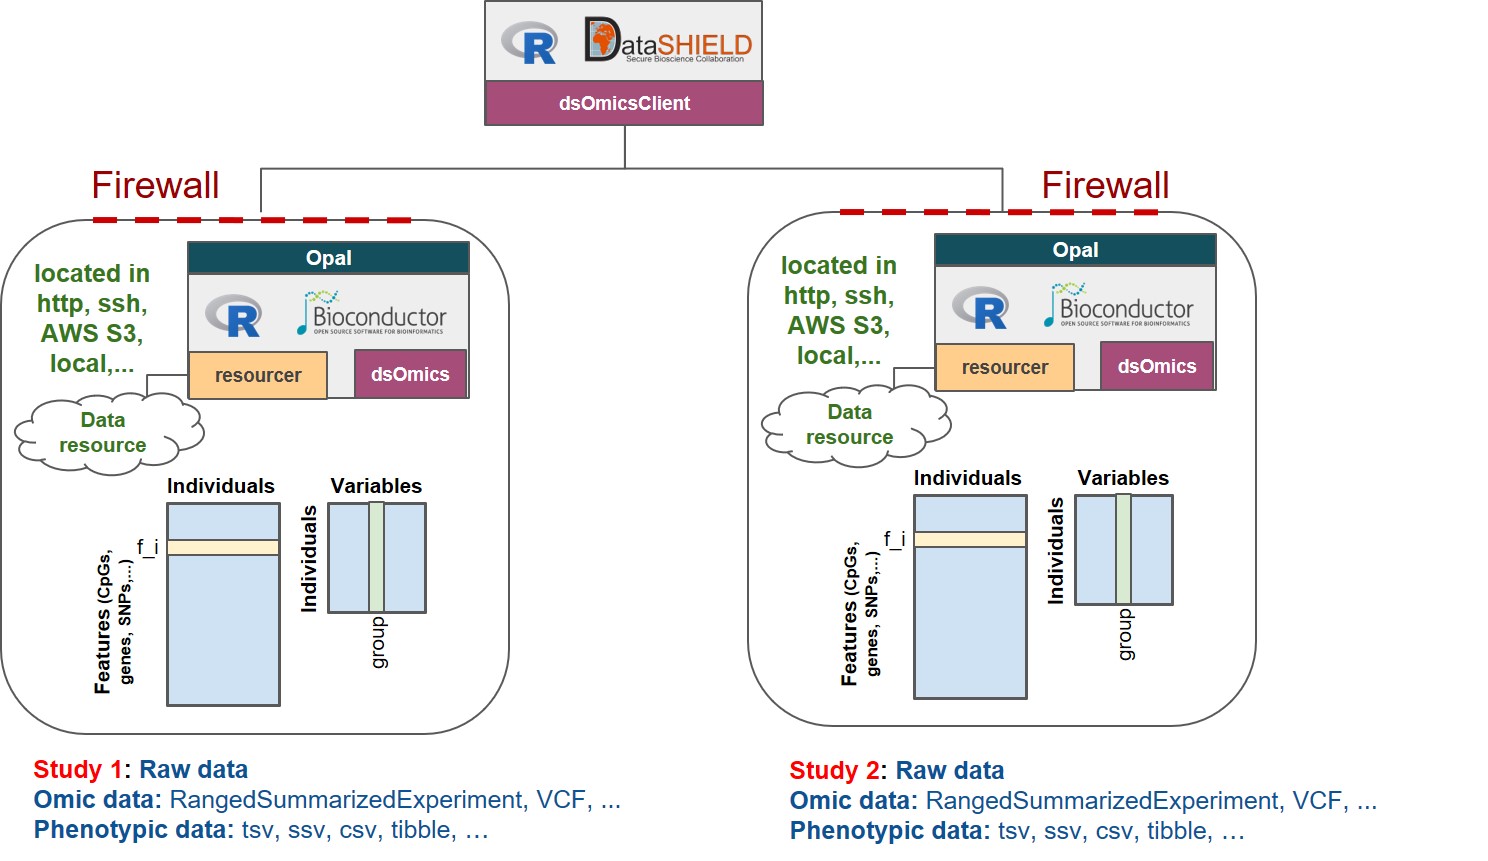 Non-disclosive omic data analysis with DataSHIELD and Bioconductor. The figure illustrates how the `resourcer` package is used to get access to omic data through the Opal servers. Then DataSHIELD is used in the client side to perform non-disclosive data analyses.